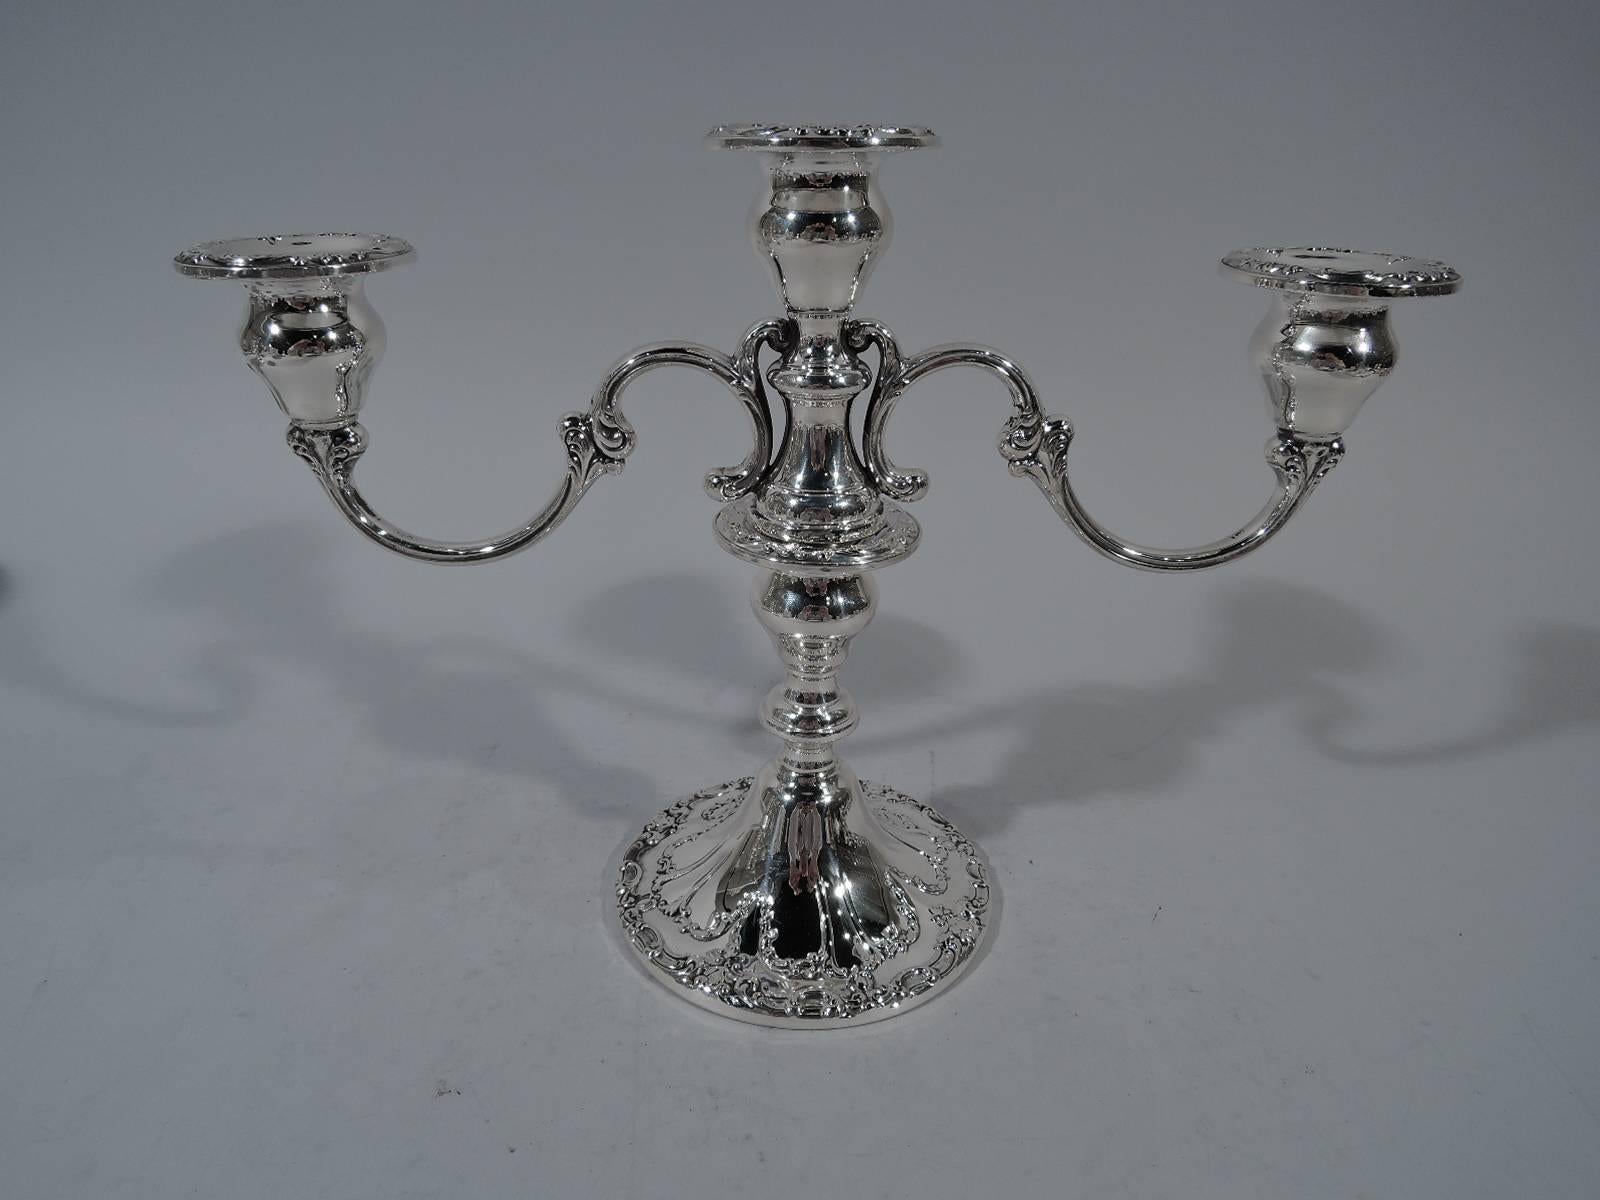 A charming pair of sterling silver three-light low candelabra in Chantilly pattern. Made by Gorham in Providence. Each: Central socket with two mounted s-scroll arms, each terminating in single socket. Ornate scrollwork applied to bobeches and base.